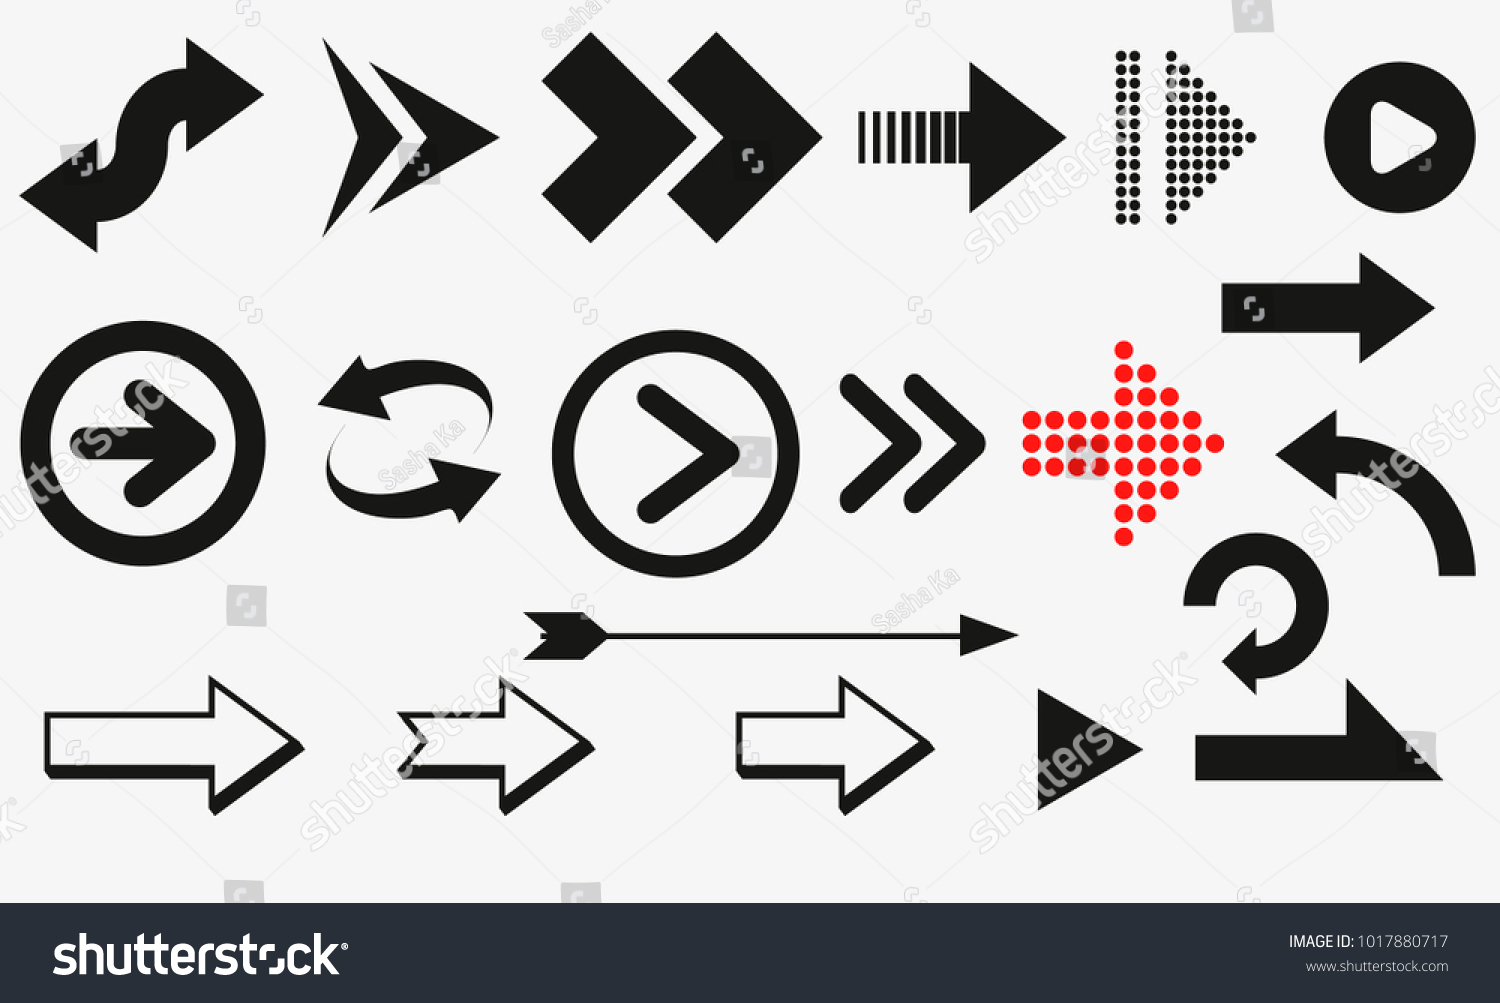 arrows vector collection black. Different black Arrows icons,vector set. Abstract elements for business infographic. Up and down trend. #1017880717